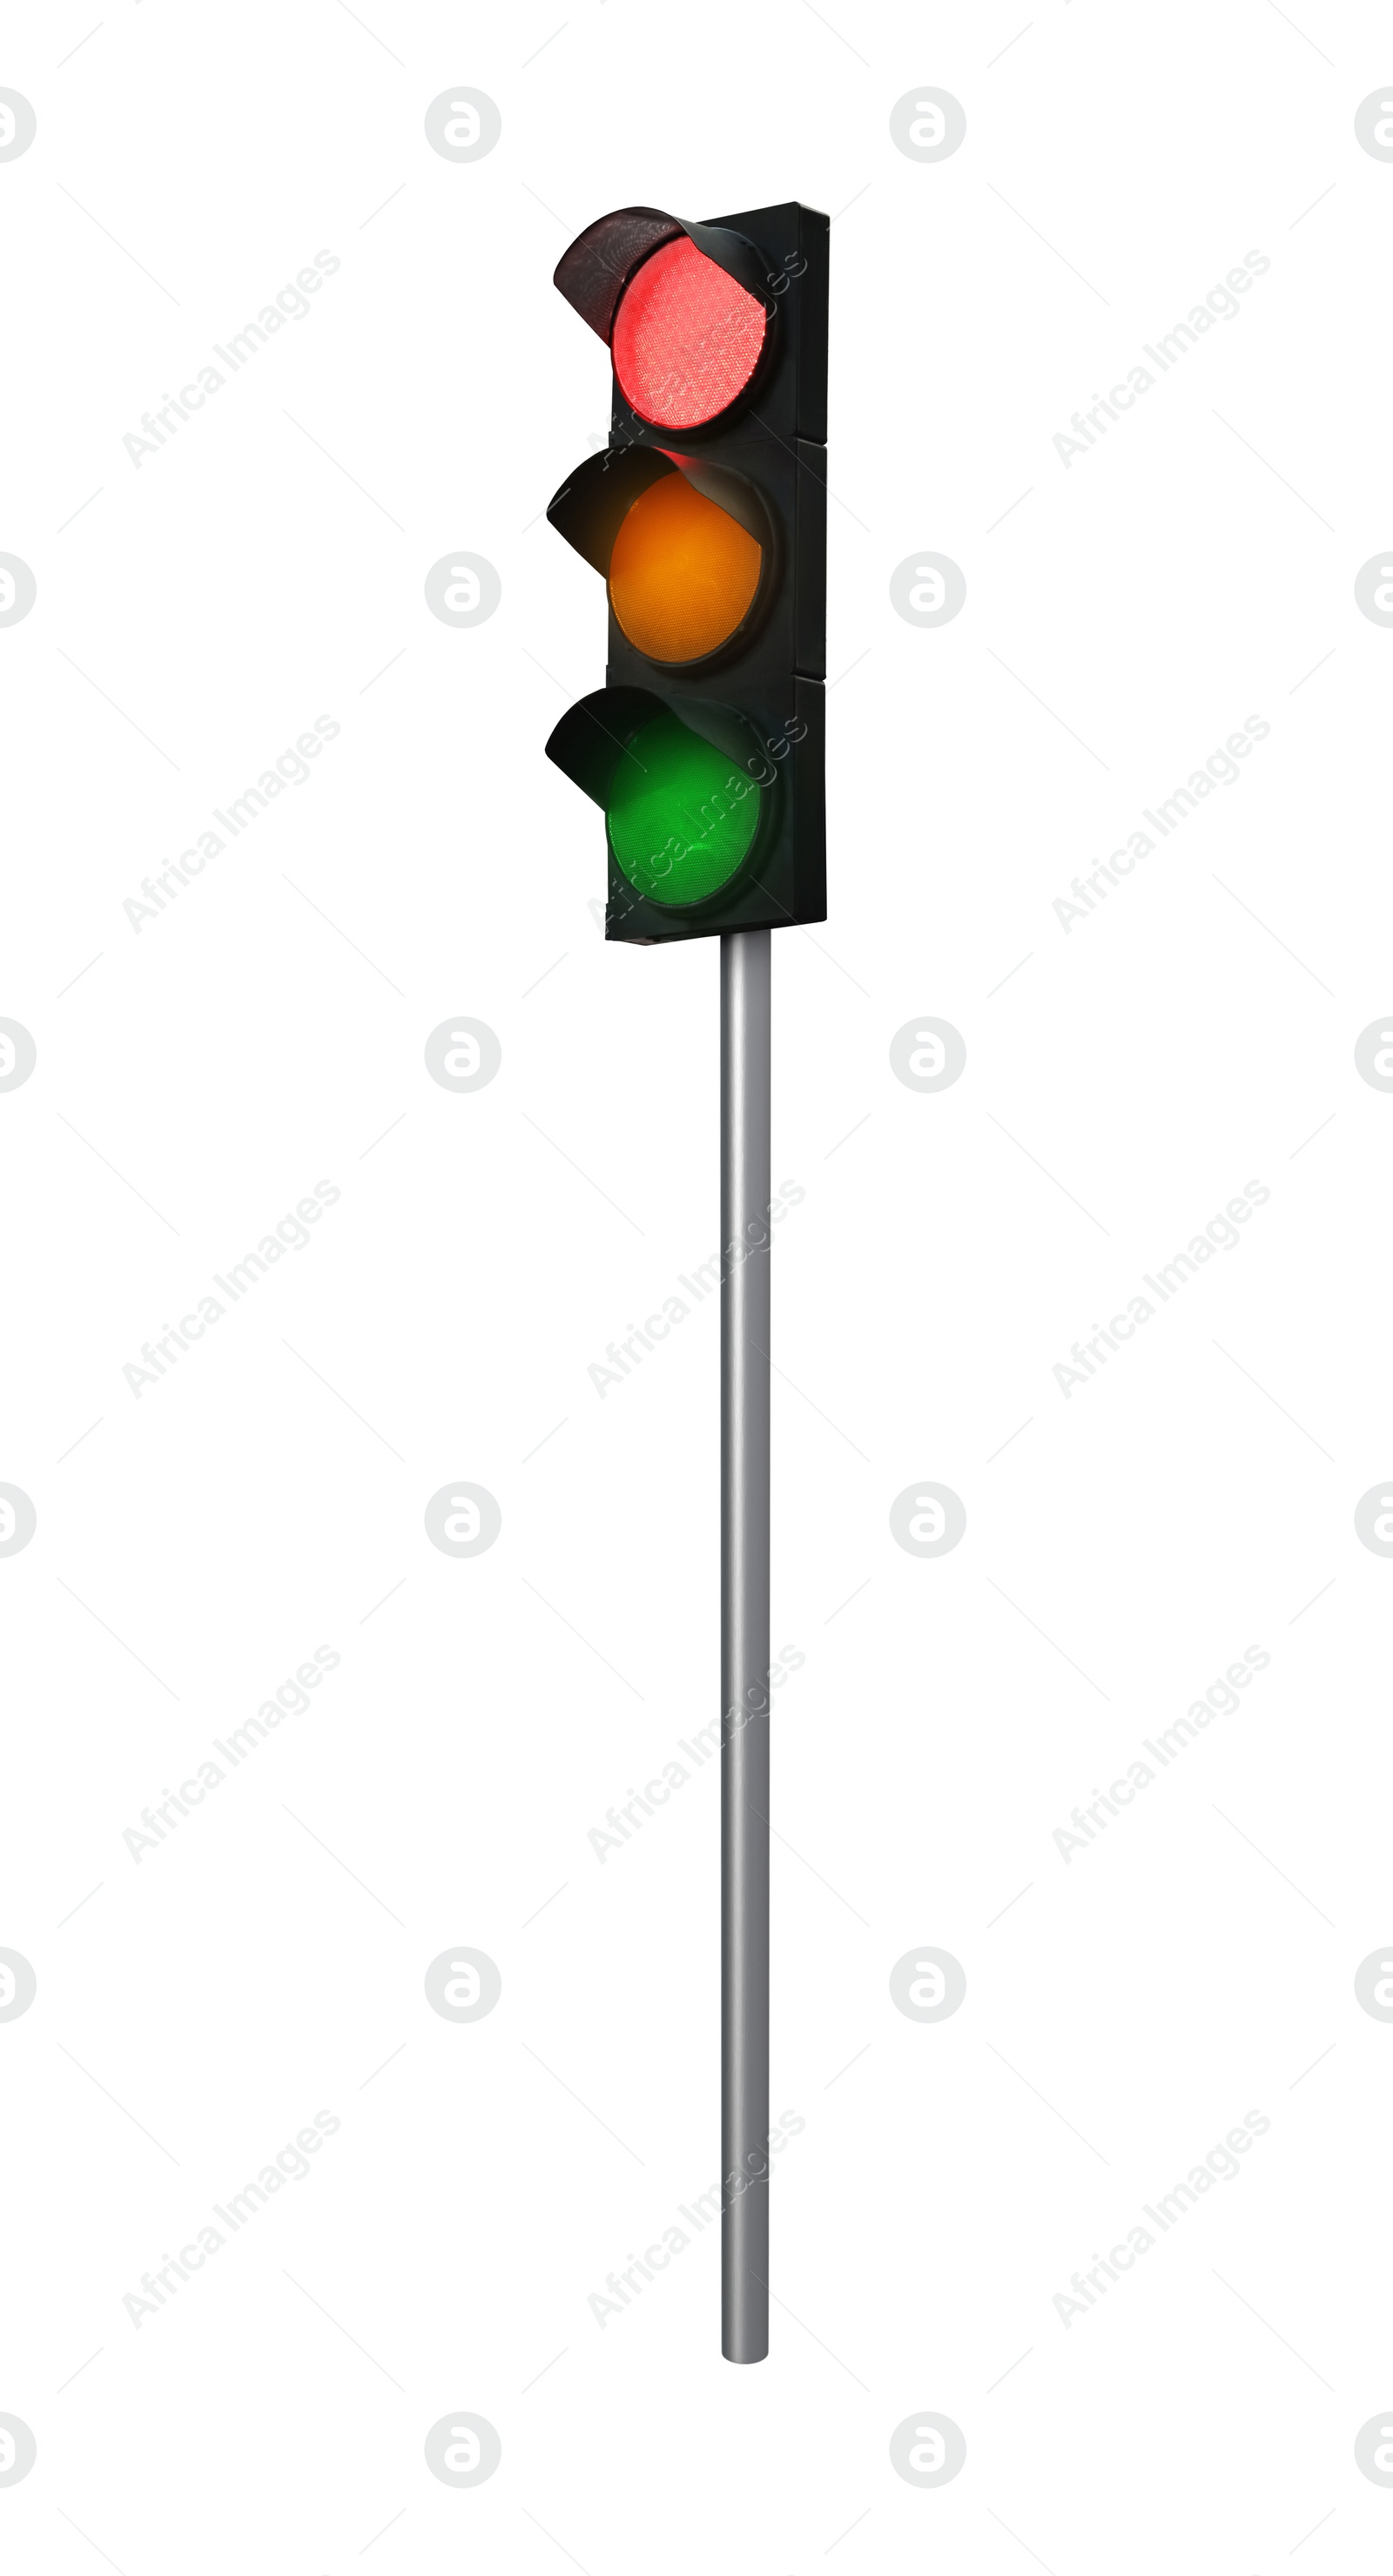 Image of Traffic light with pole on white background